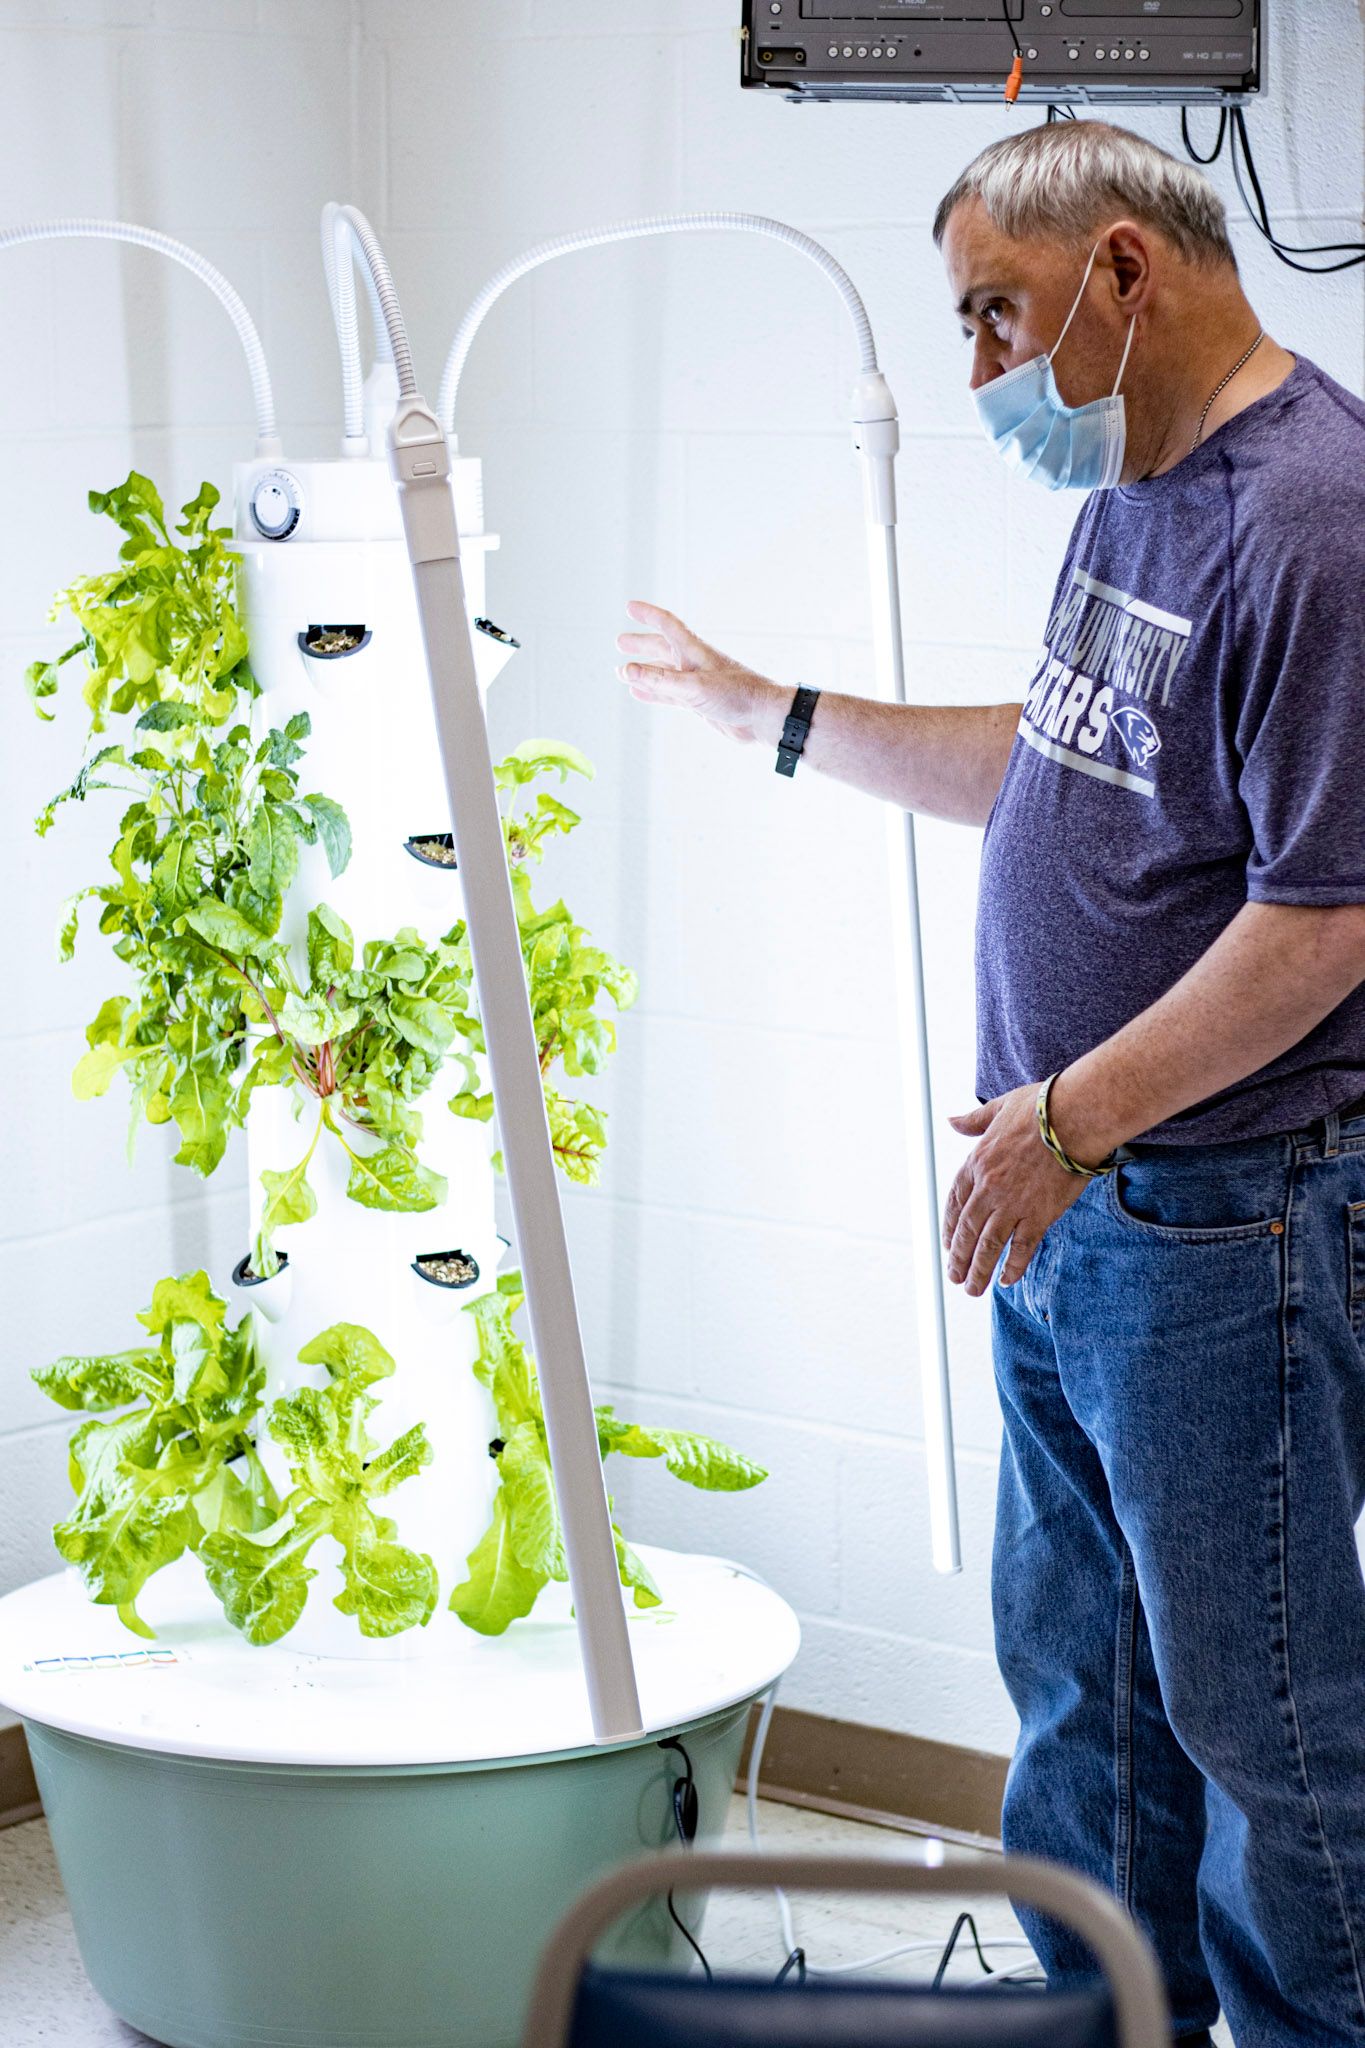 Wild and Free participant John shows off the indoor Tower Garden.